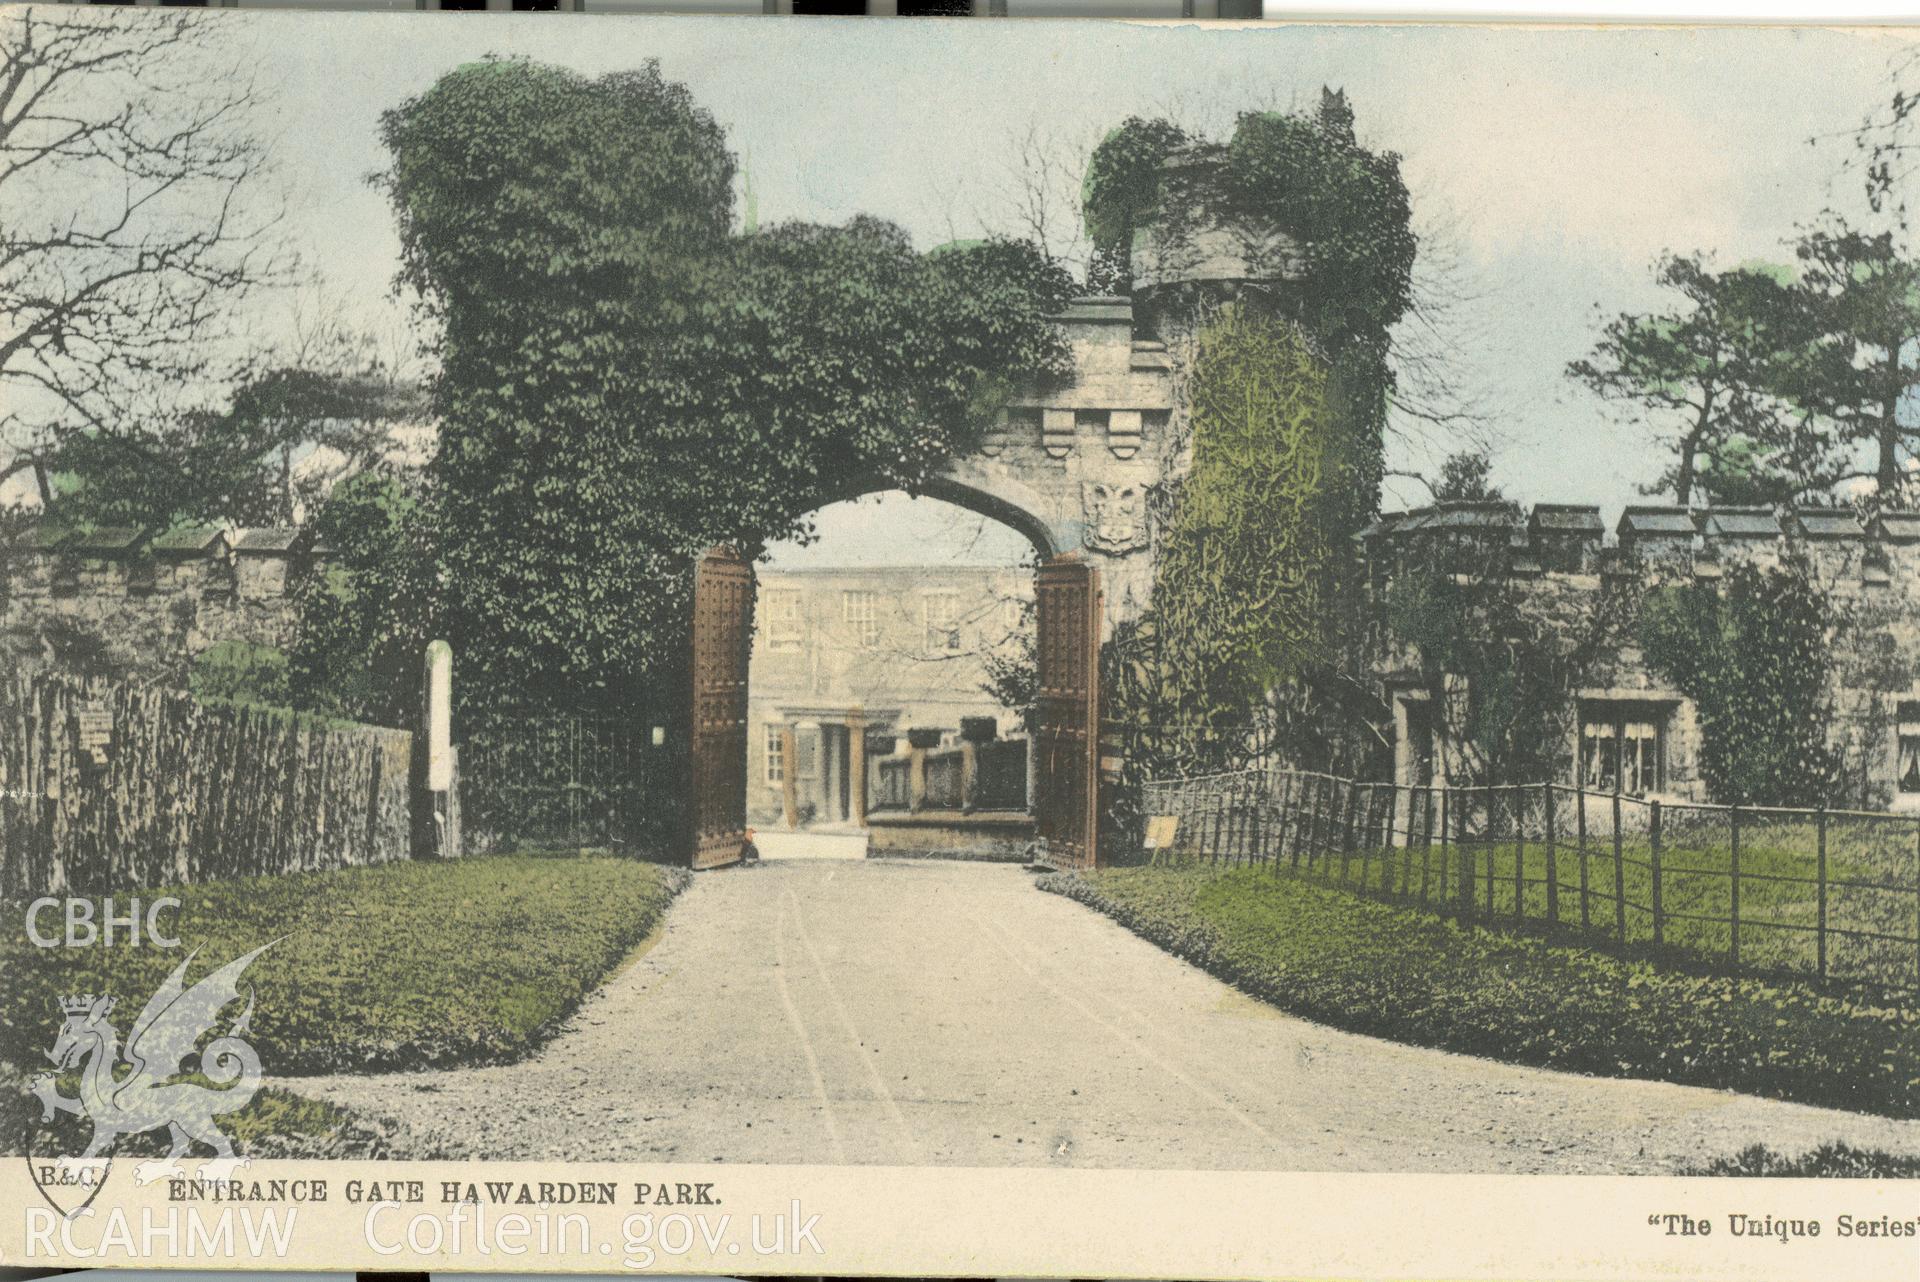 Digitised postcard image of Hawarden castle including entrance gate, The Unique Series T.S.B. & C. Produced by Parks and Gardens Data Services, from an original item in the Peter Davis Collection at Parks and Gardens UK. We hold only web-resolution images of this collection, suitable for viewing on screen and for research purposes only. We do not hold the original images, or publication quality scans.